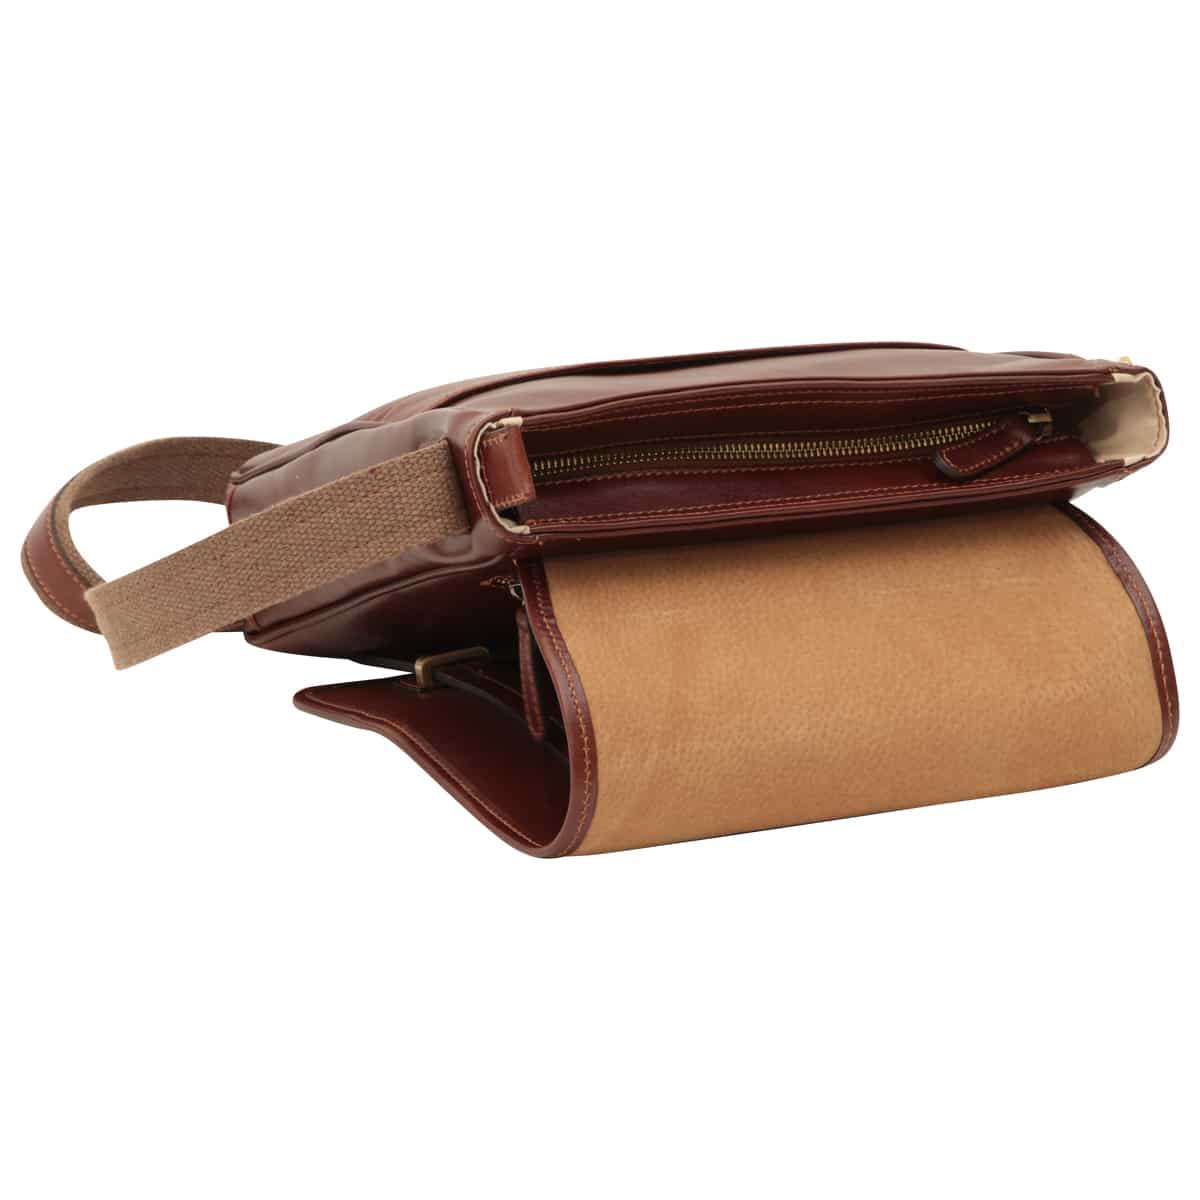 Medium leather bag with double magnetic closure - Brown  | 406589MA US | Old Angler Firenze